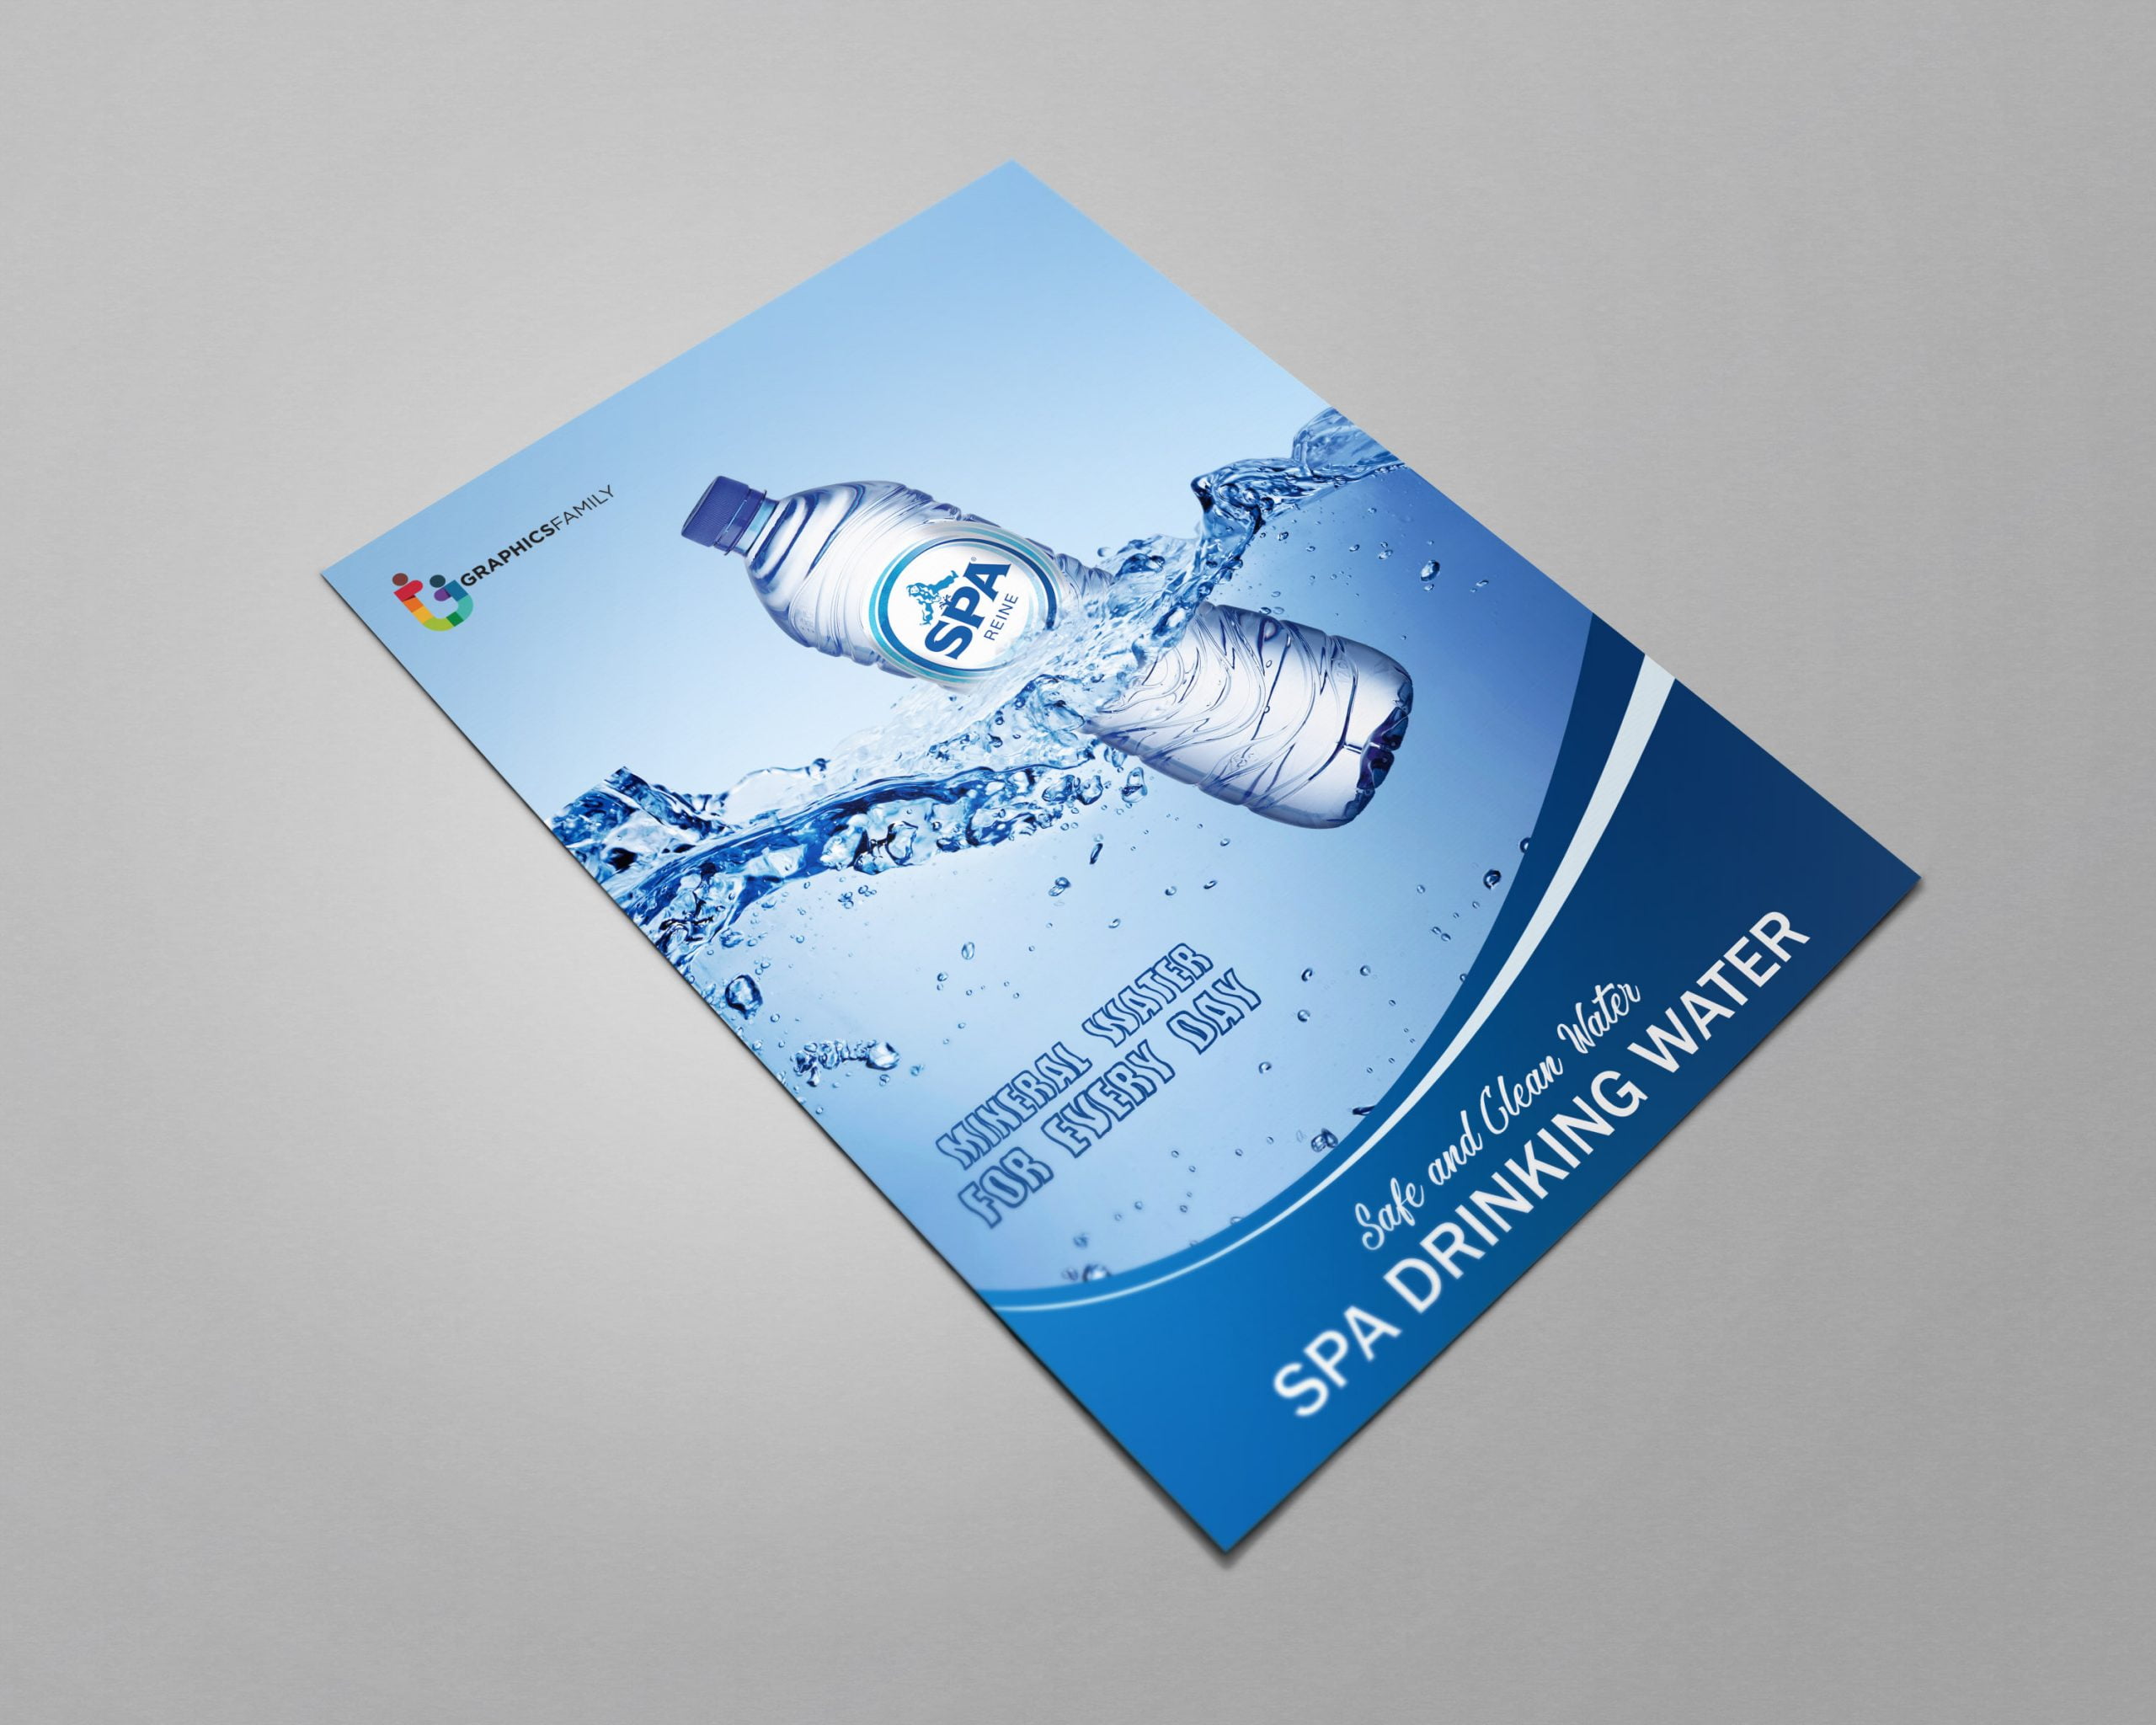 Modern Water Company Flyer Design Free PSD GraphicsFamily